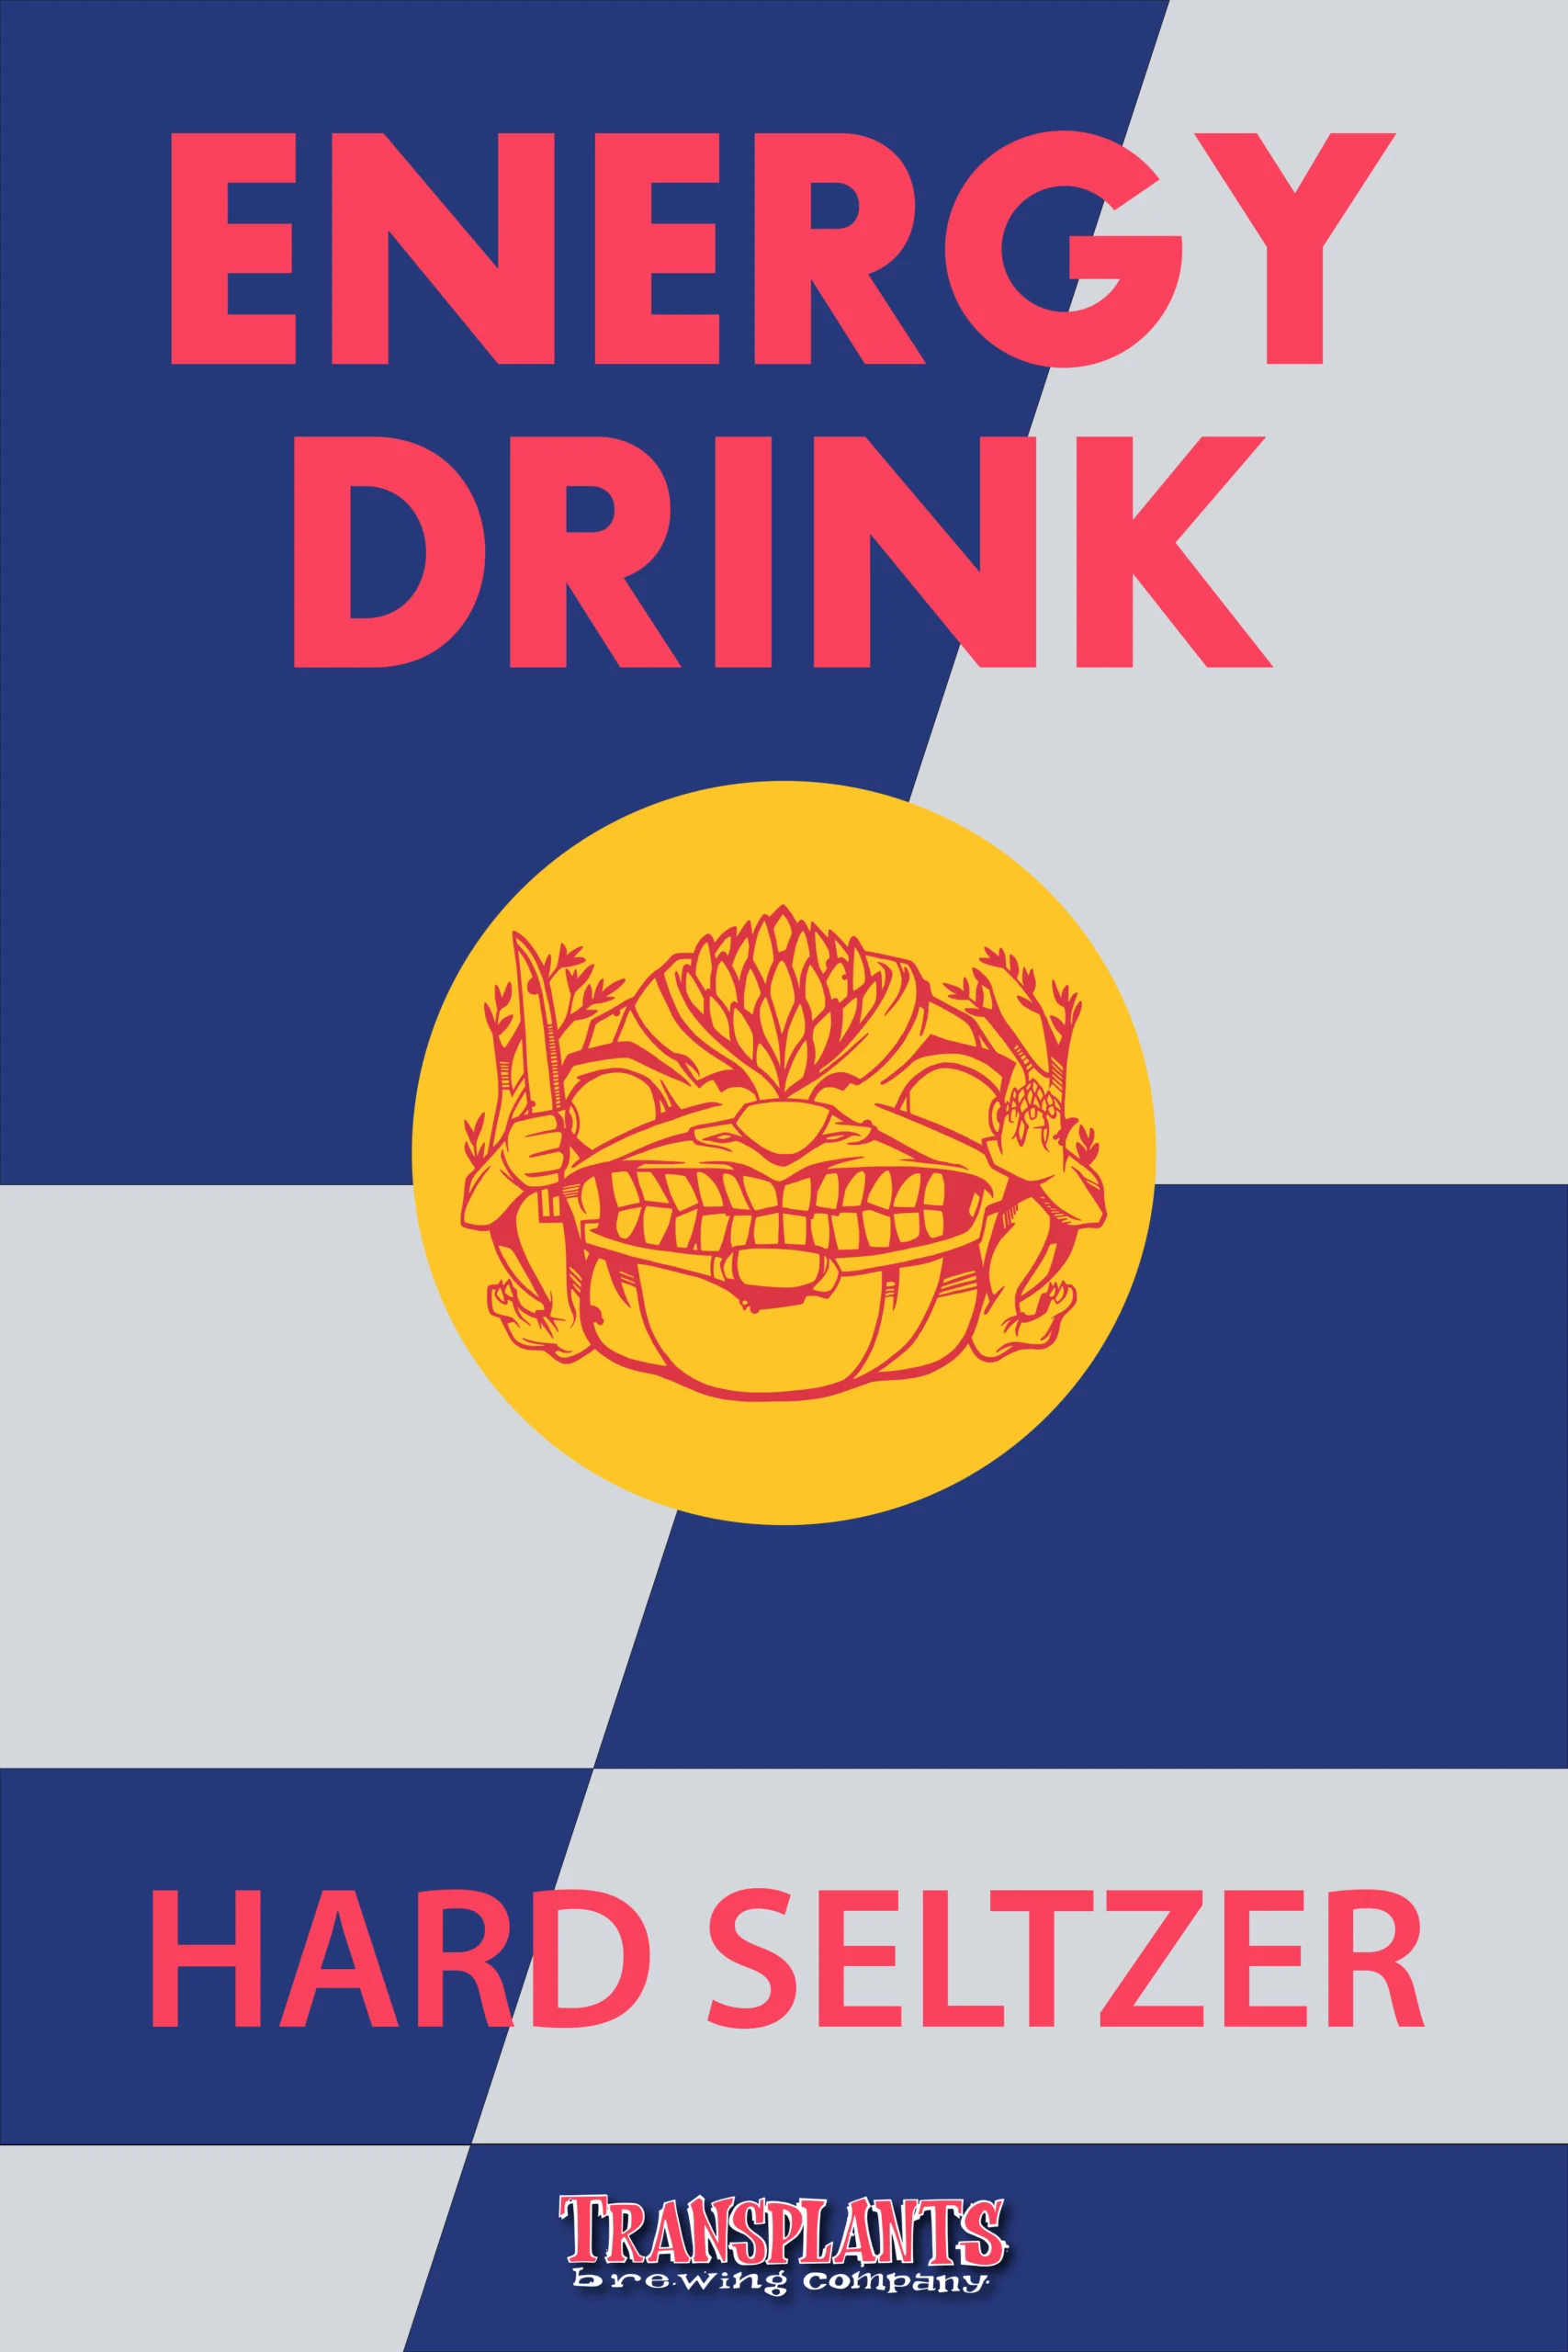 Poster representing the beverage ENERGY DRINK, a hard seltzer with an alcohol content of 5%, available on tap at Transplants Brewing